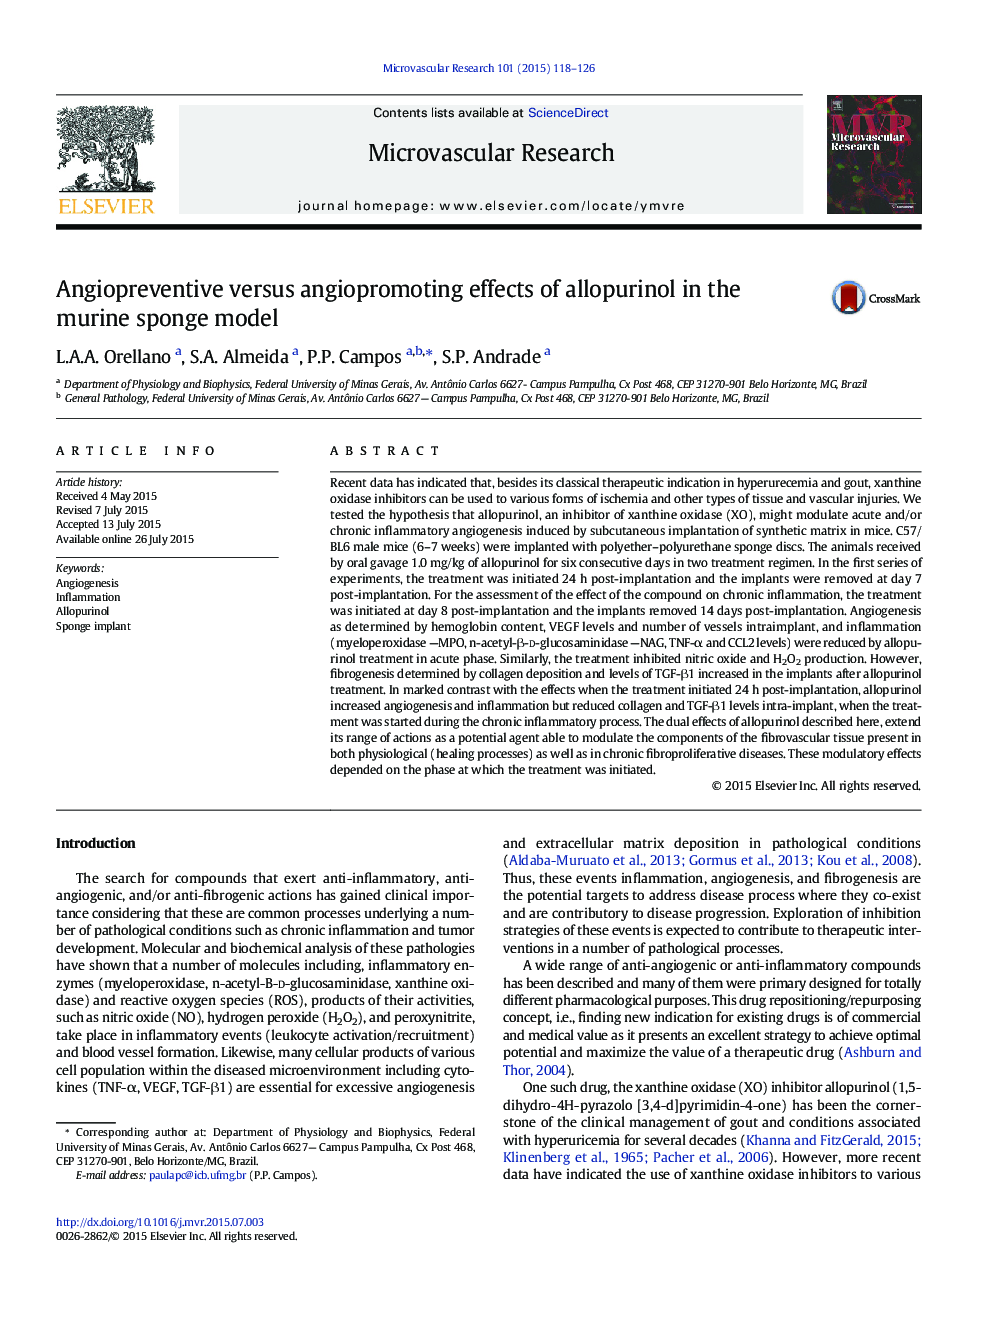 Angiopreventive versus angiopromoting effects of allopurinol in the murine sponge model